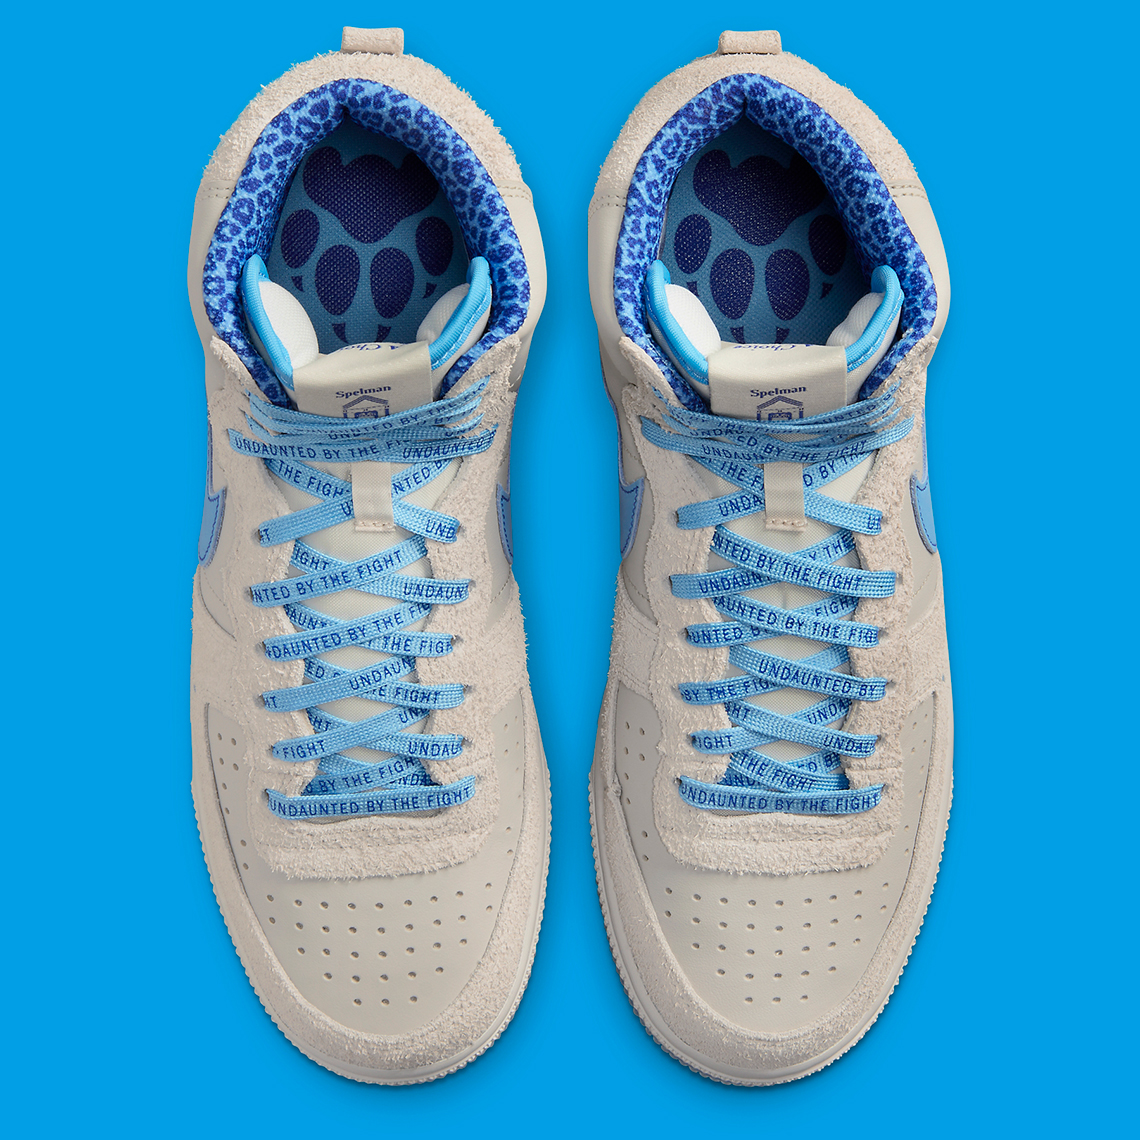 THE UGLY NIKE FREE WOVEN NRG Spelman College Fv2084 001 10